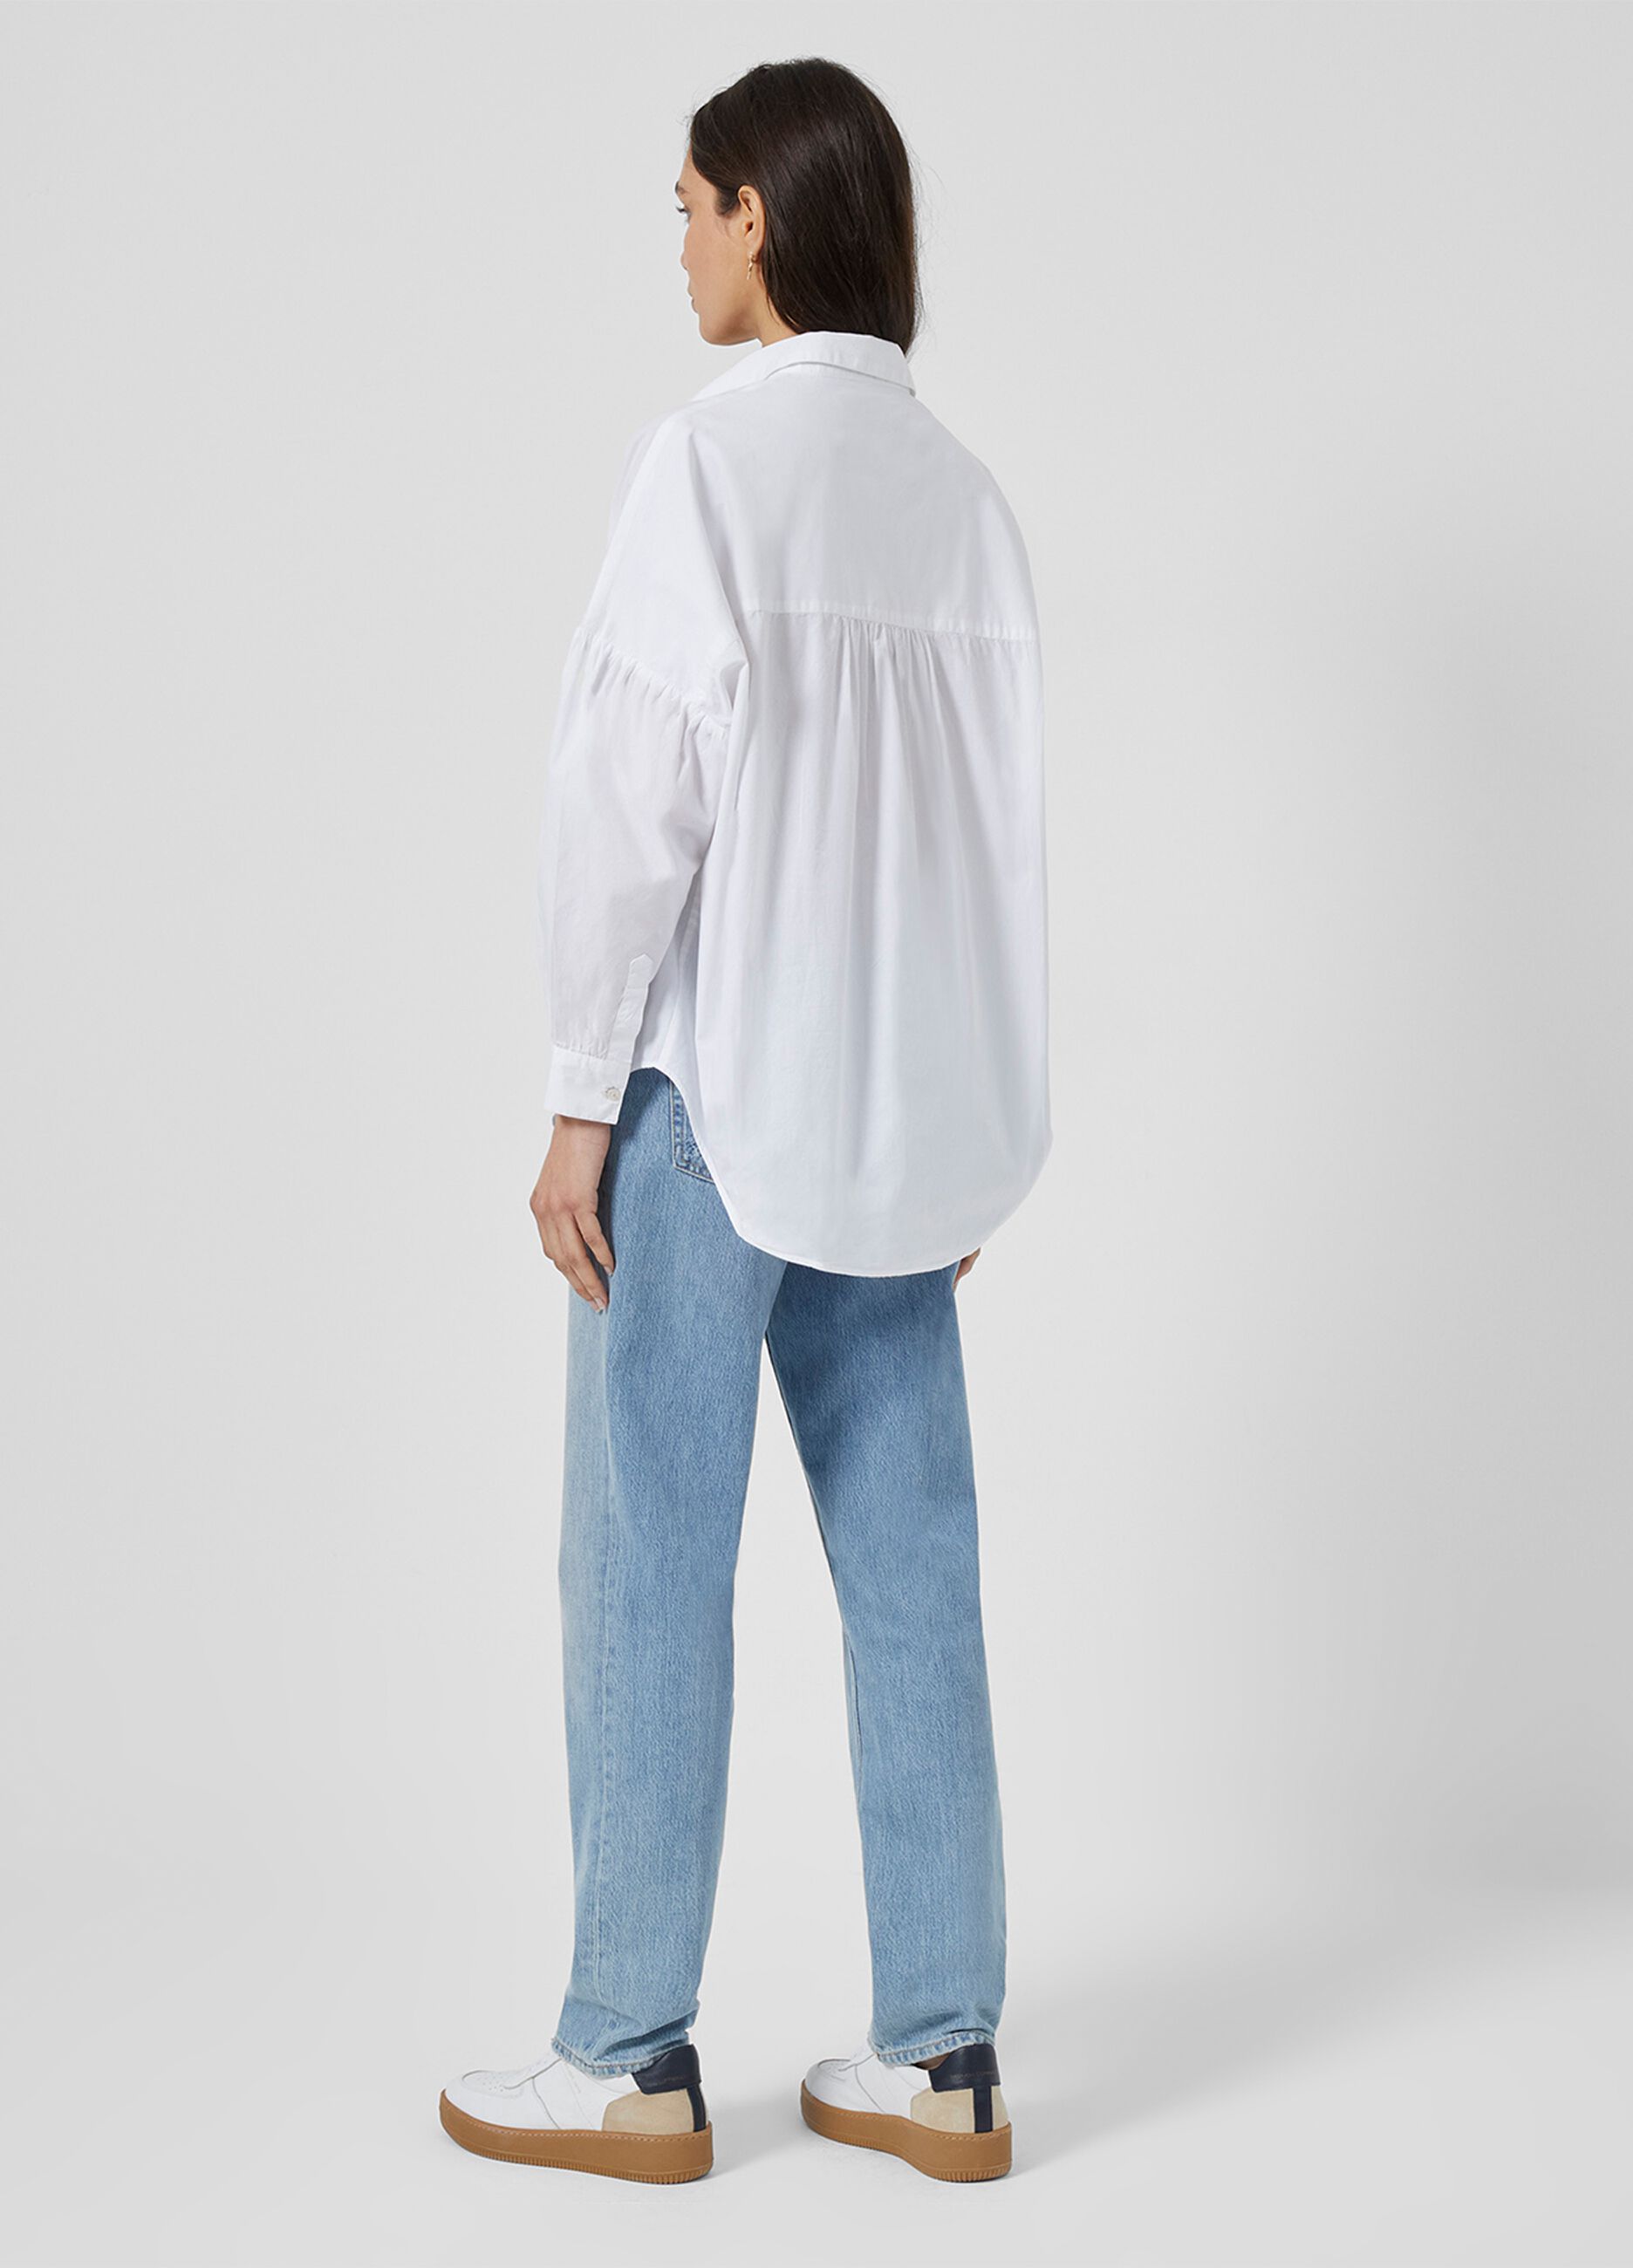 French Connection oversized shirt in cotton.